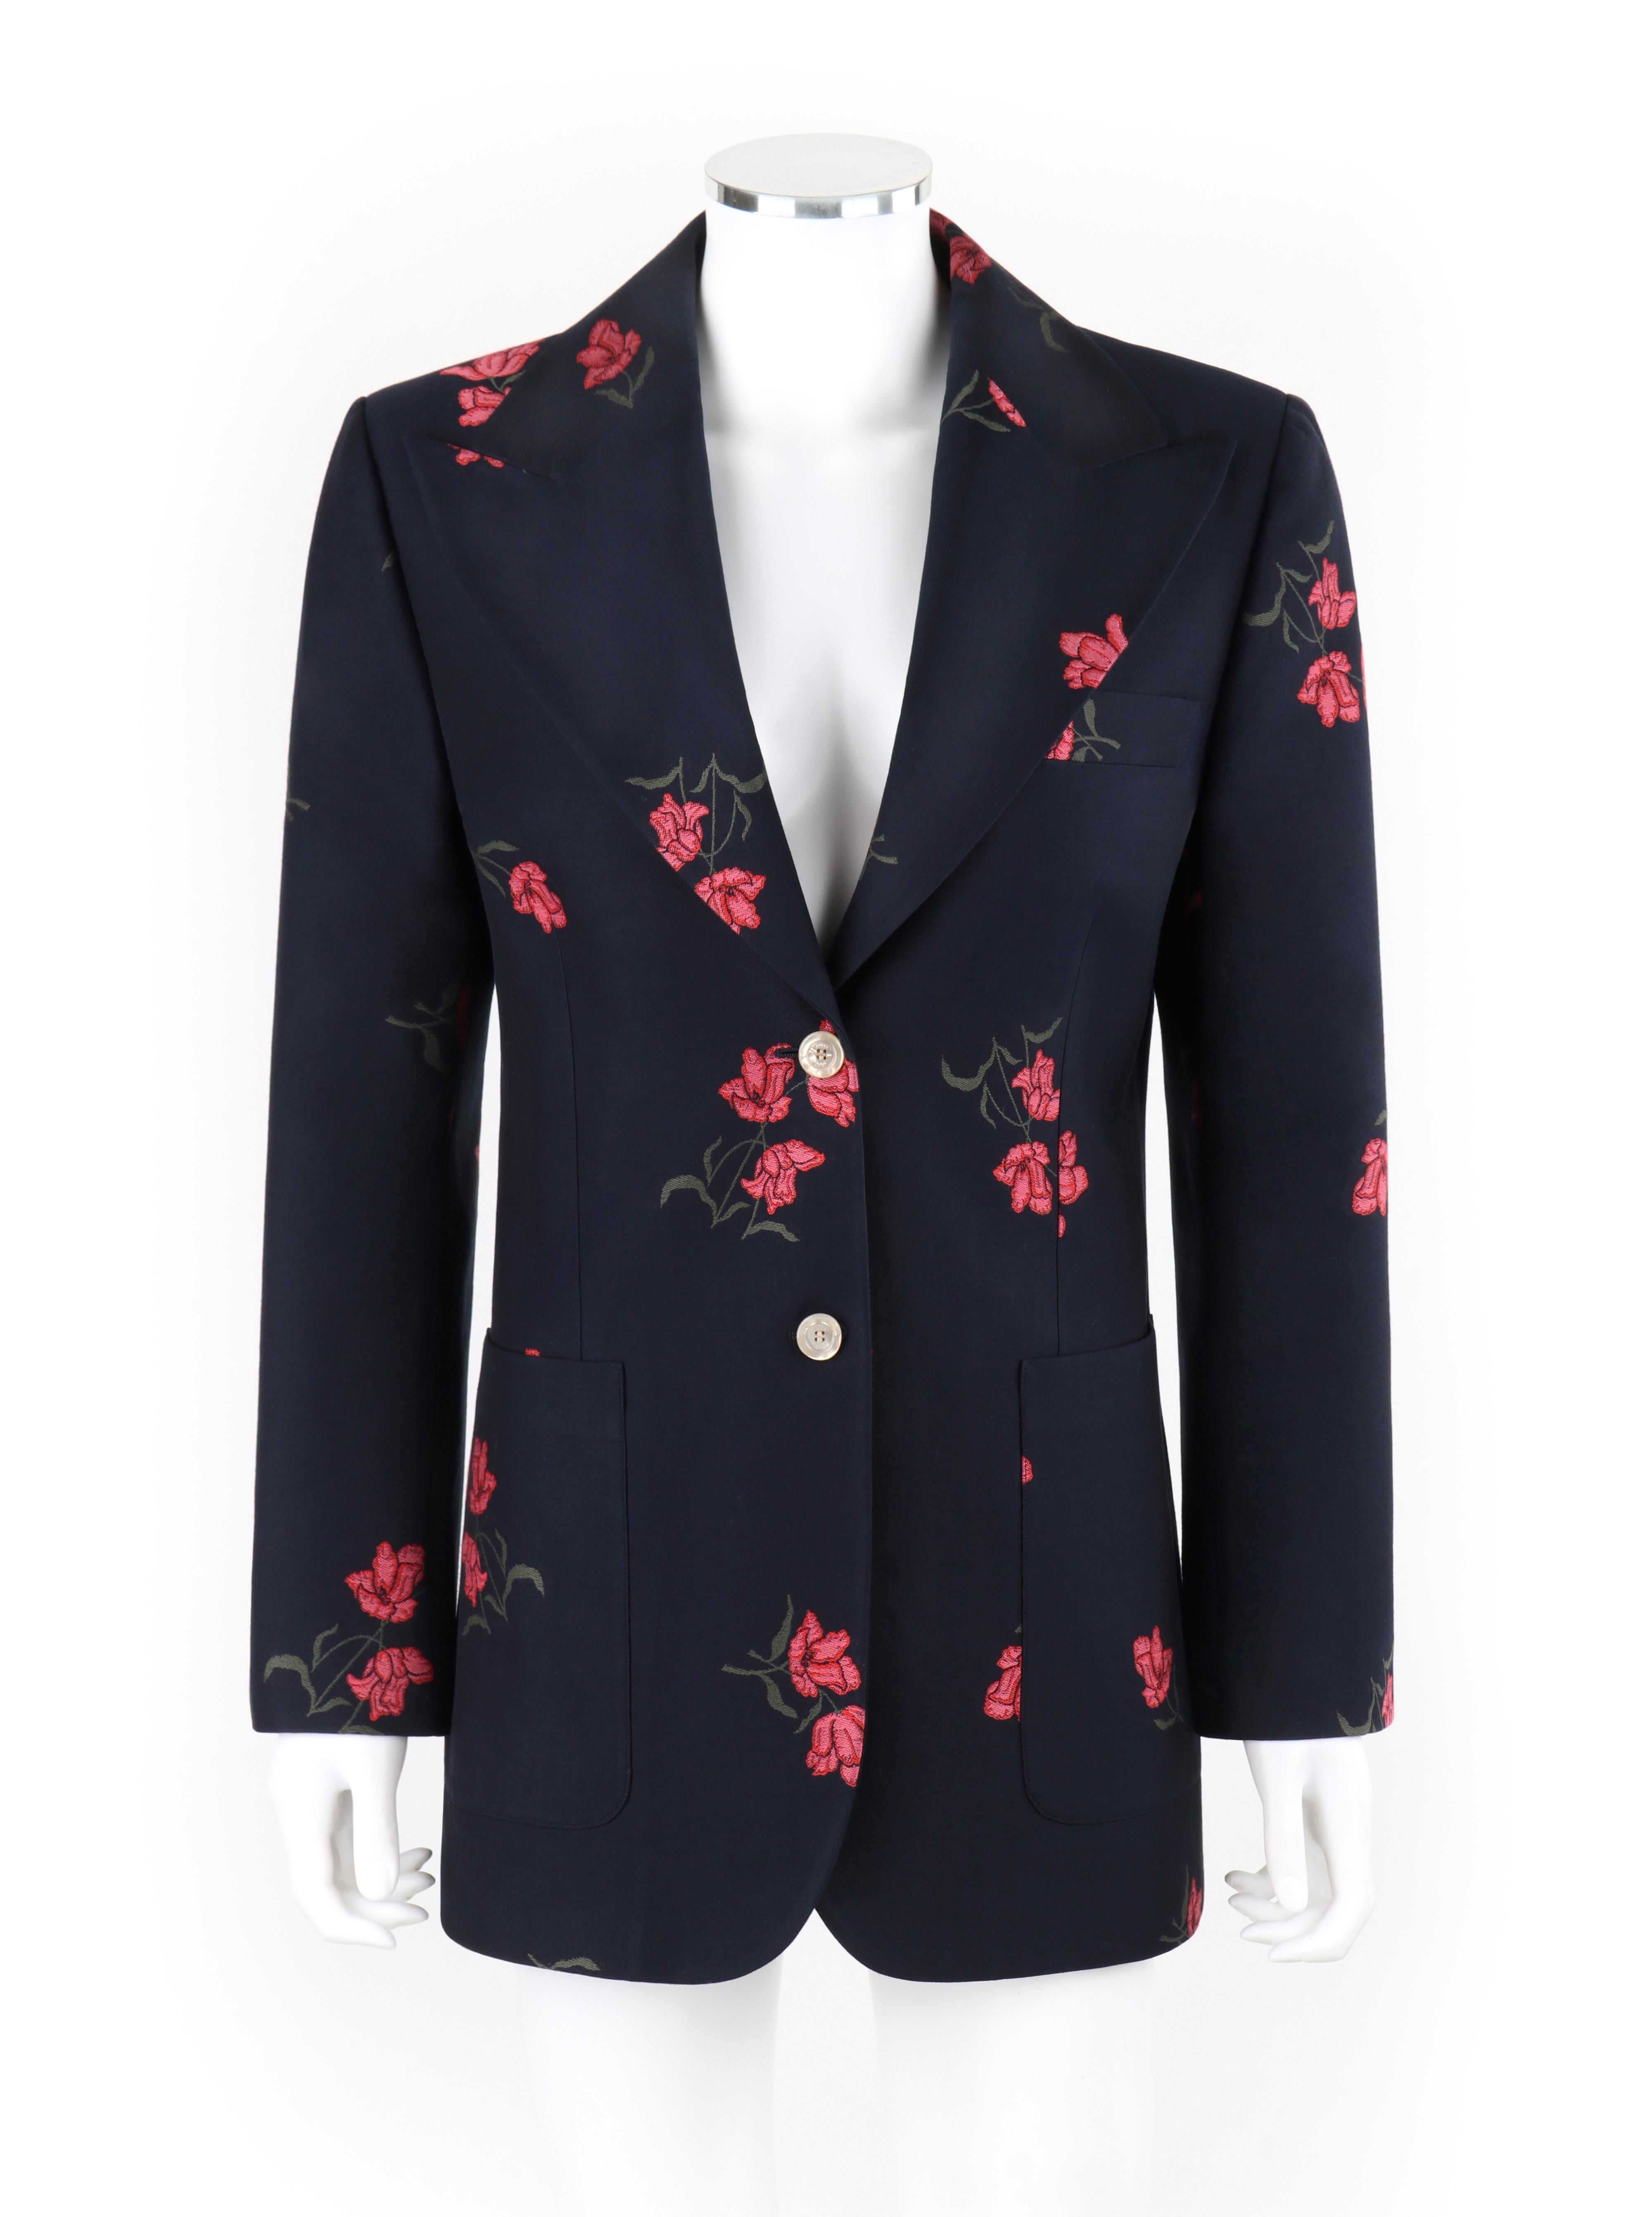 GUCCI S/S 2017 Blue Green Pink Floral Wool Pointed Collar Blazer Jacket

Brand / Manufacturer: Gucci
Collection: S/S 2017
Designer: Alessandro Michele
Style: Blazer
Color(s): Shades of blue, pink, green, white
Lined: Yes
Marked Fabric Content: 